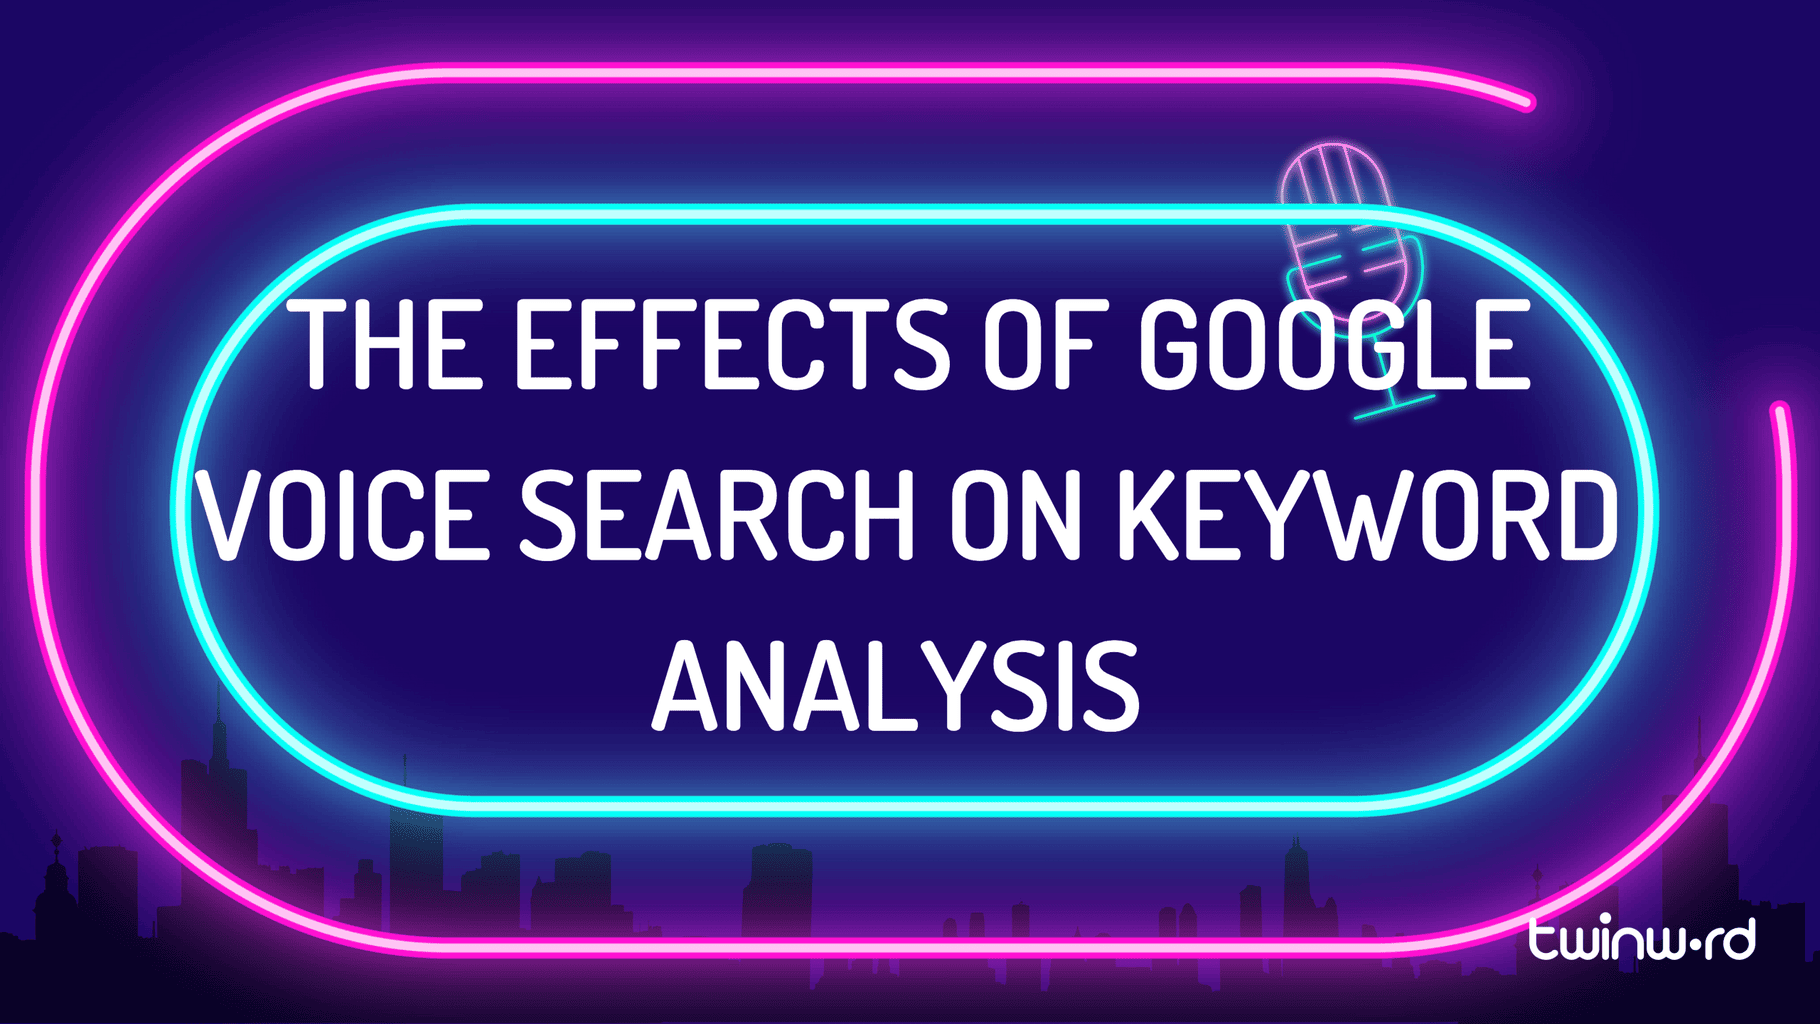 The Effects Of Google Voice Search On Keyword Analysis